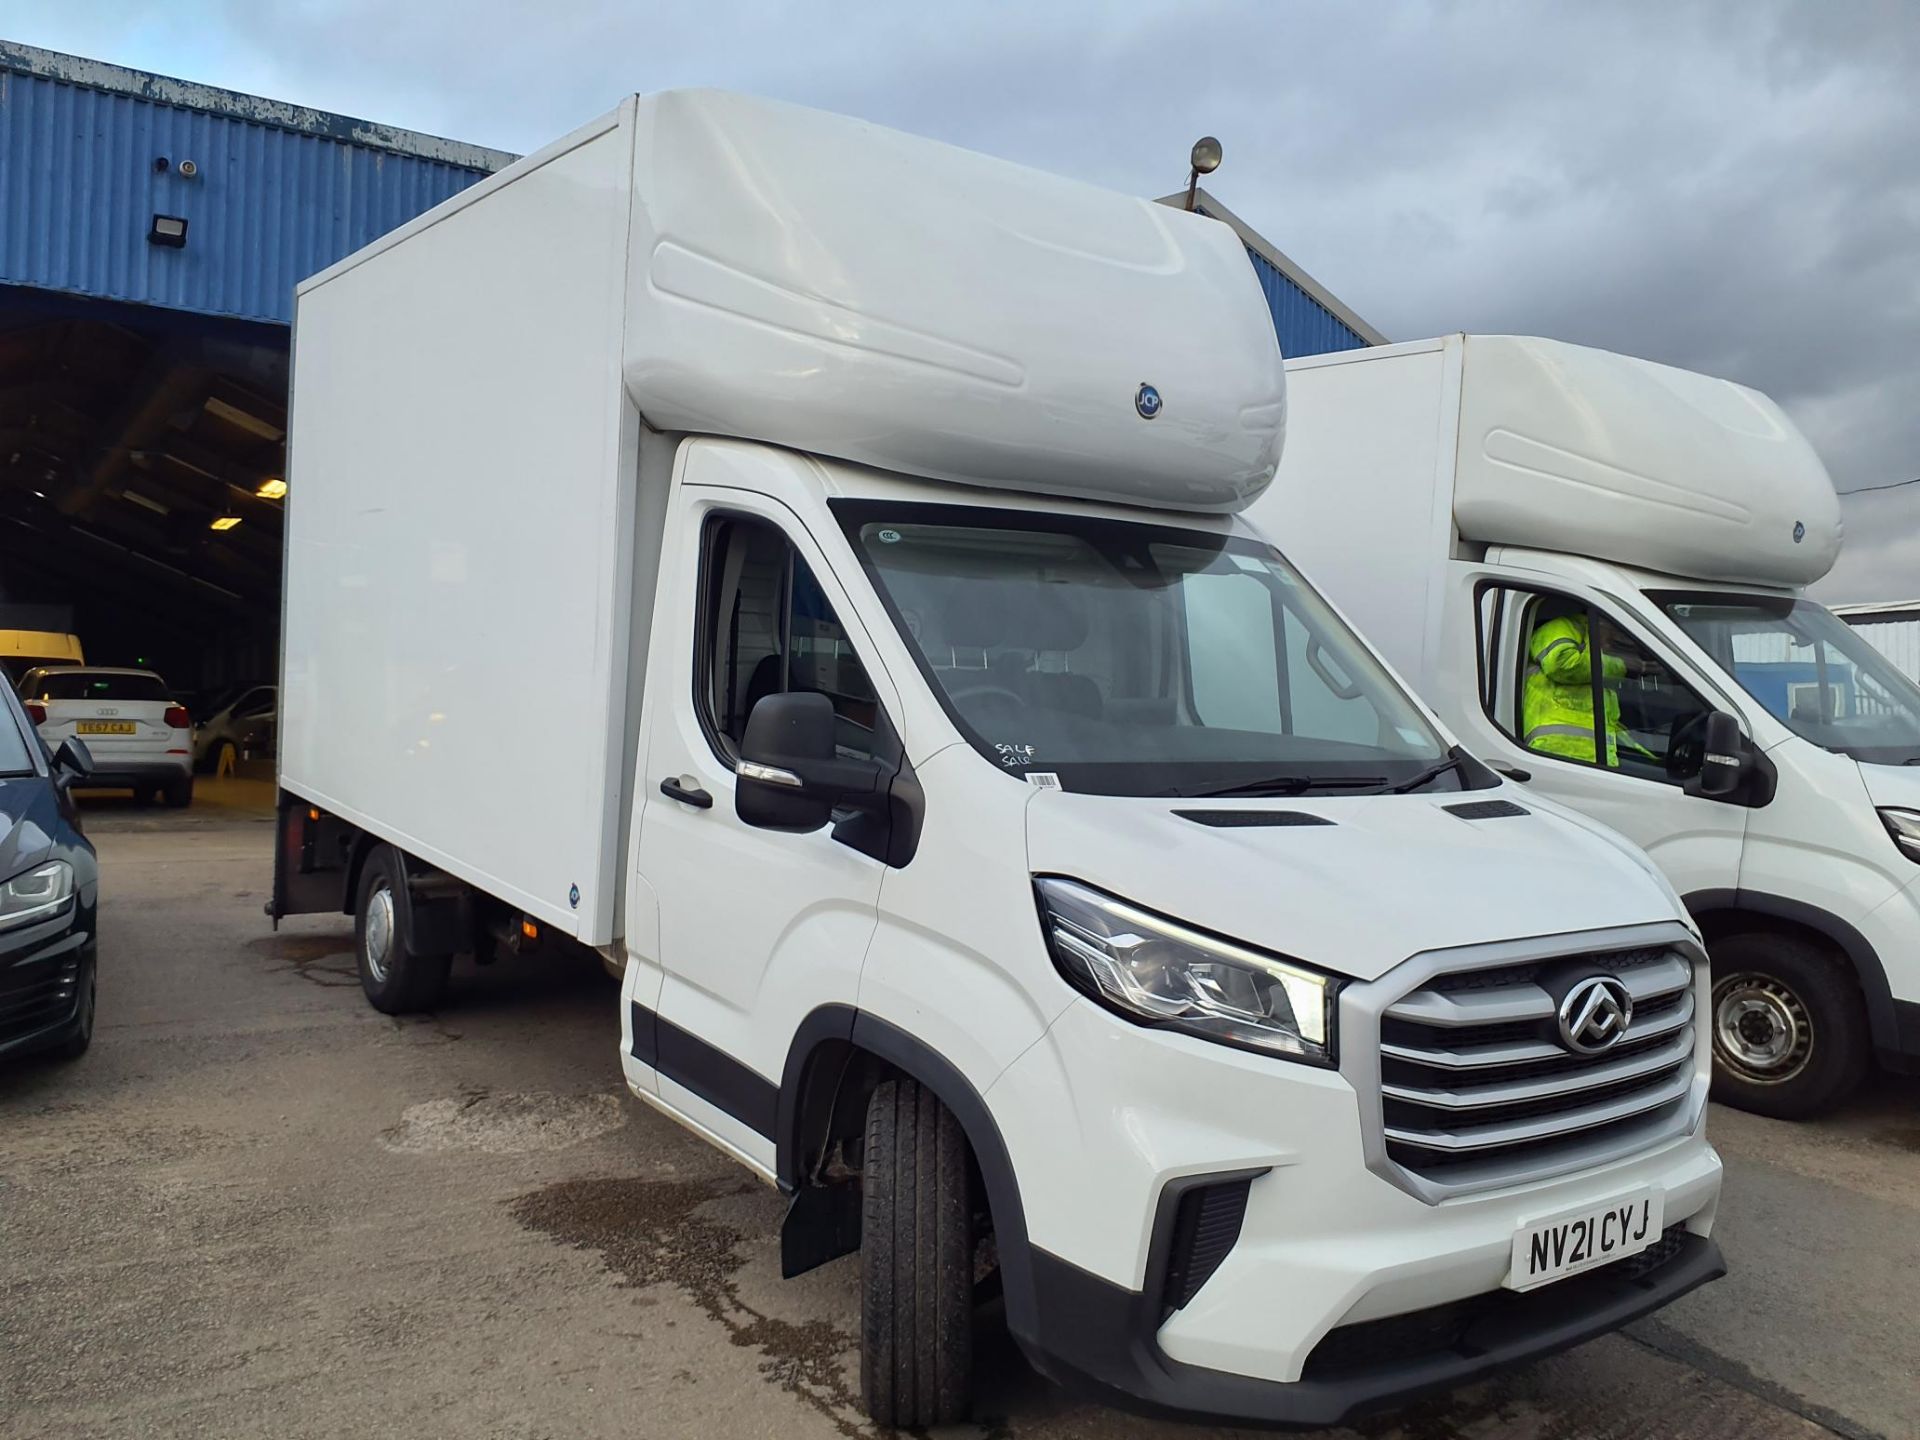 MAXUS DELIVER 2.0 D20 TURBO DIESEL LWB LUTON BOX VAN WITH ELECTRIC TAIL LIFT -21 REG ONLY 53K MILES - Image 2 of 7